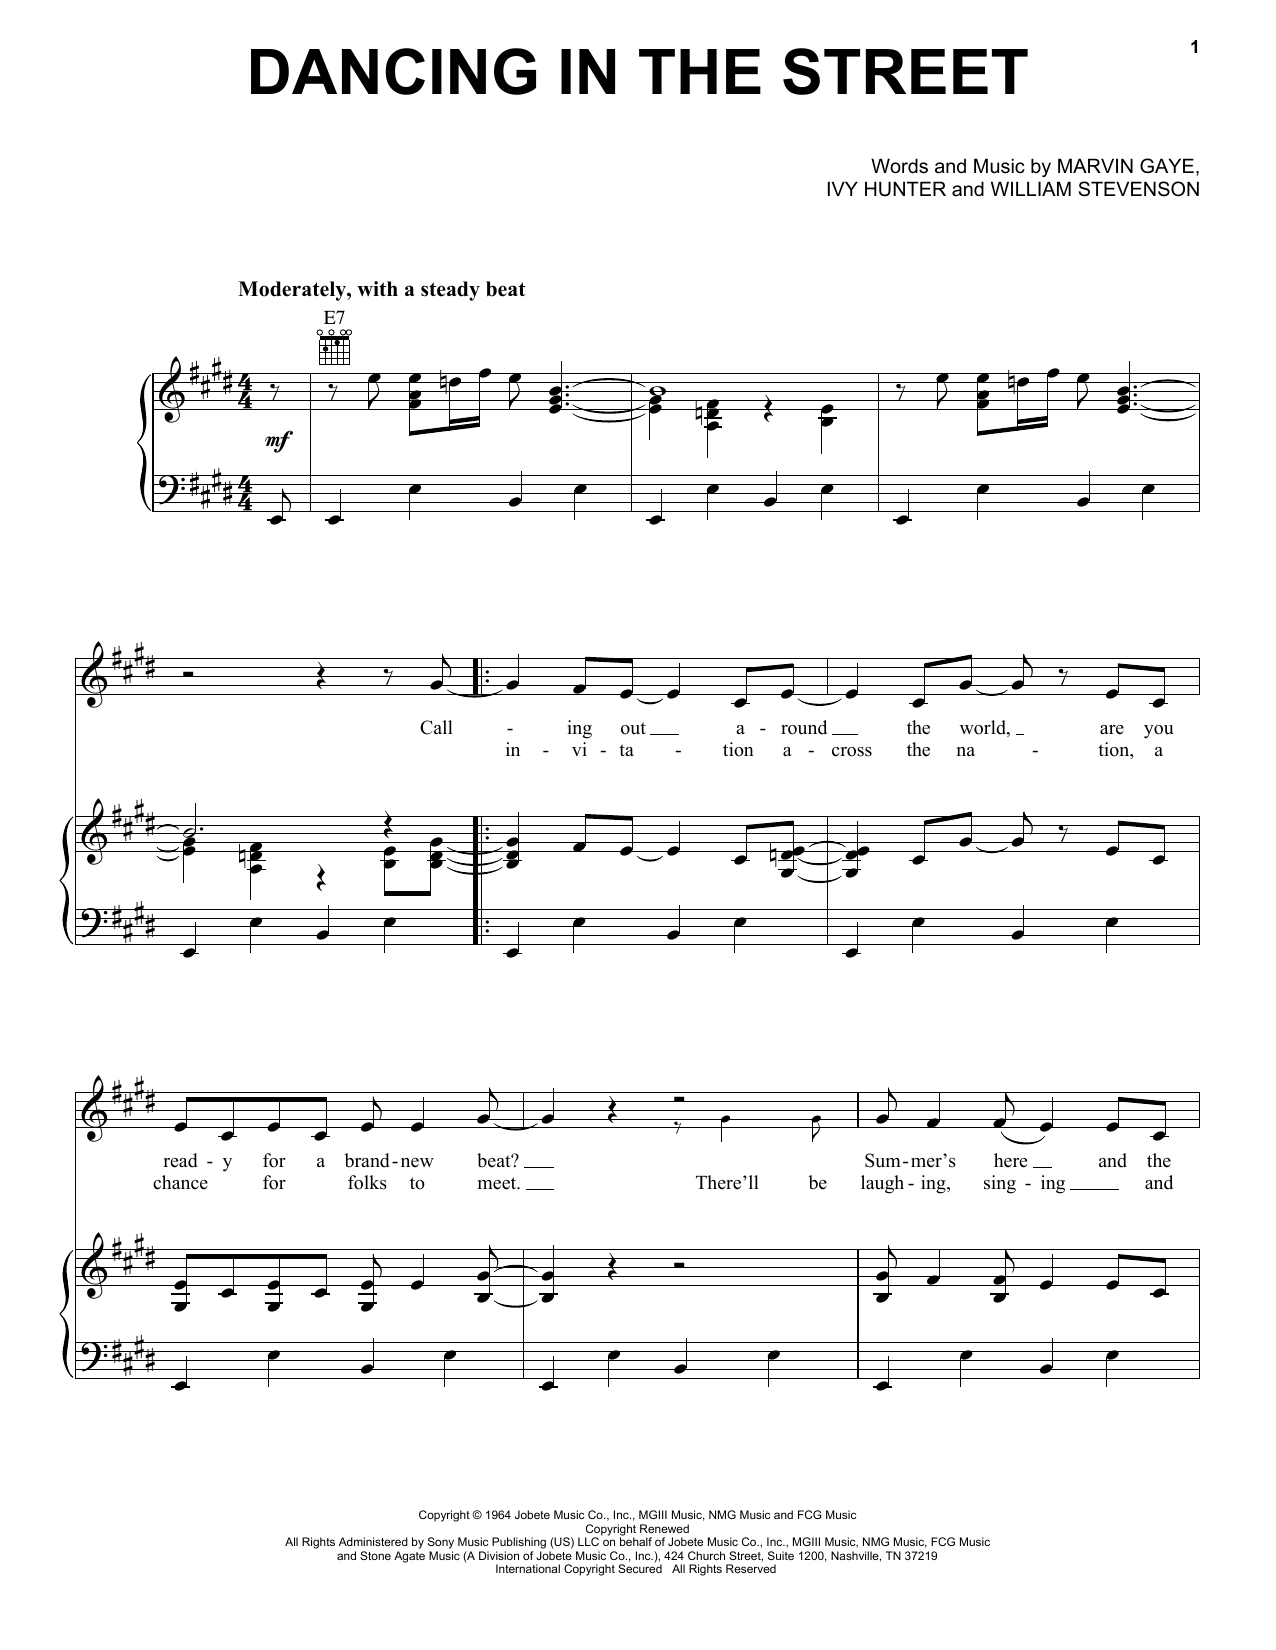 Martha & The Vandellas Dancing In The Street sheet music notes and chords. Download Printable PDF.